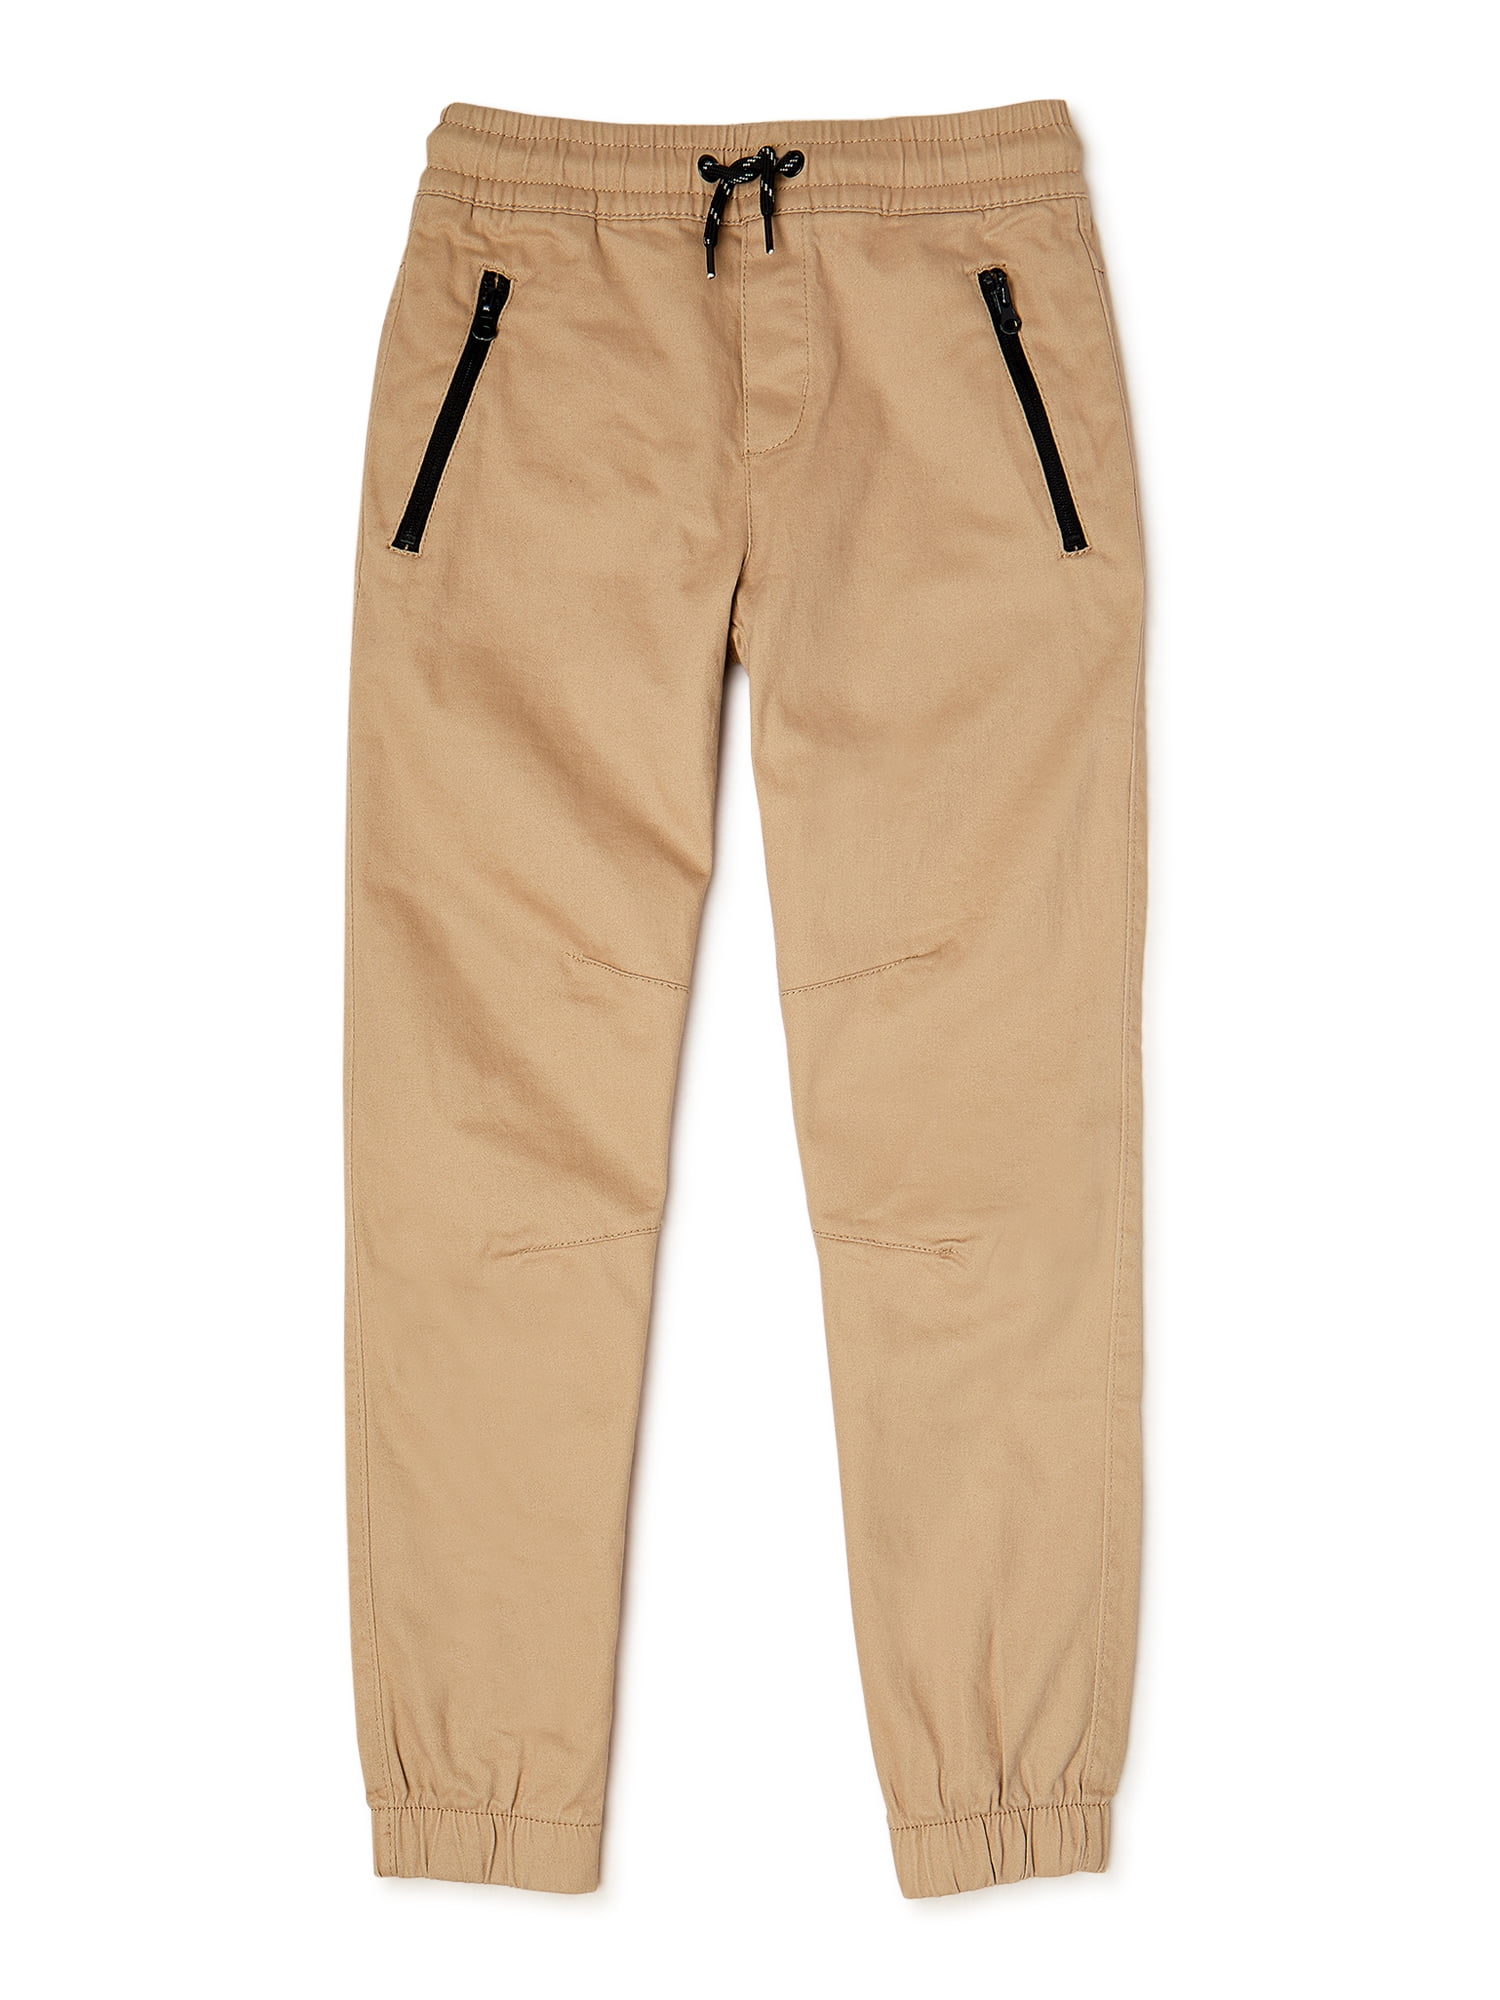 TONY HAWK Kids Boys Cotton Stretch Twill Woven Jogger Pants with Drawstring and Pockets School Clothes 